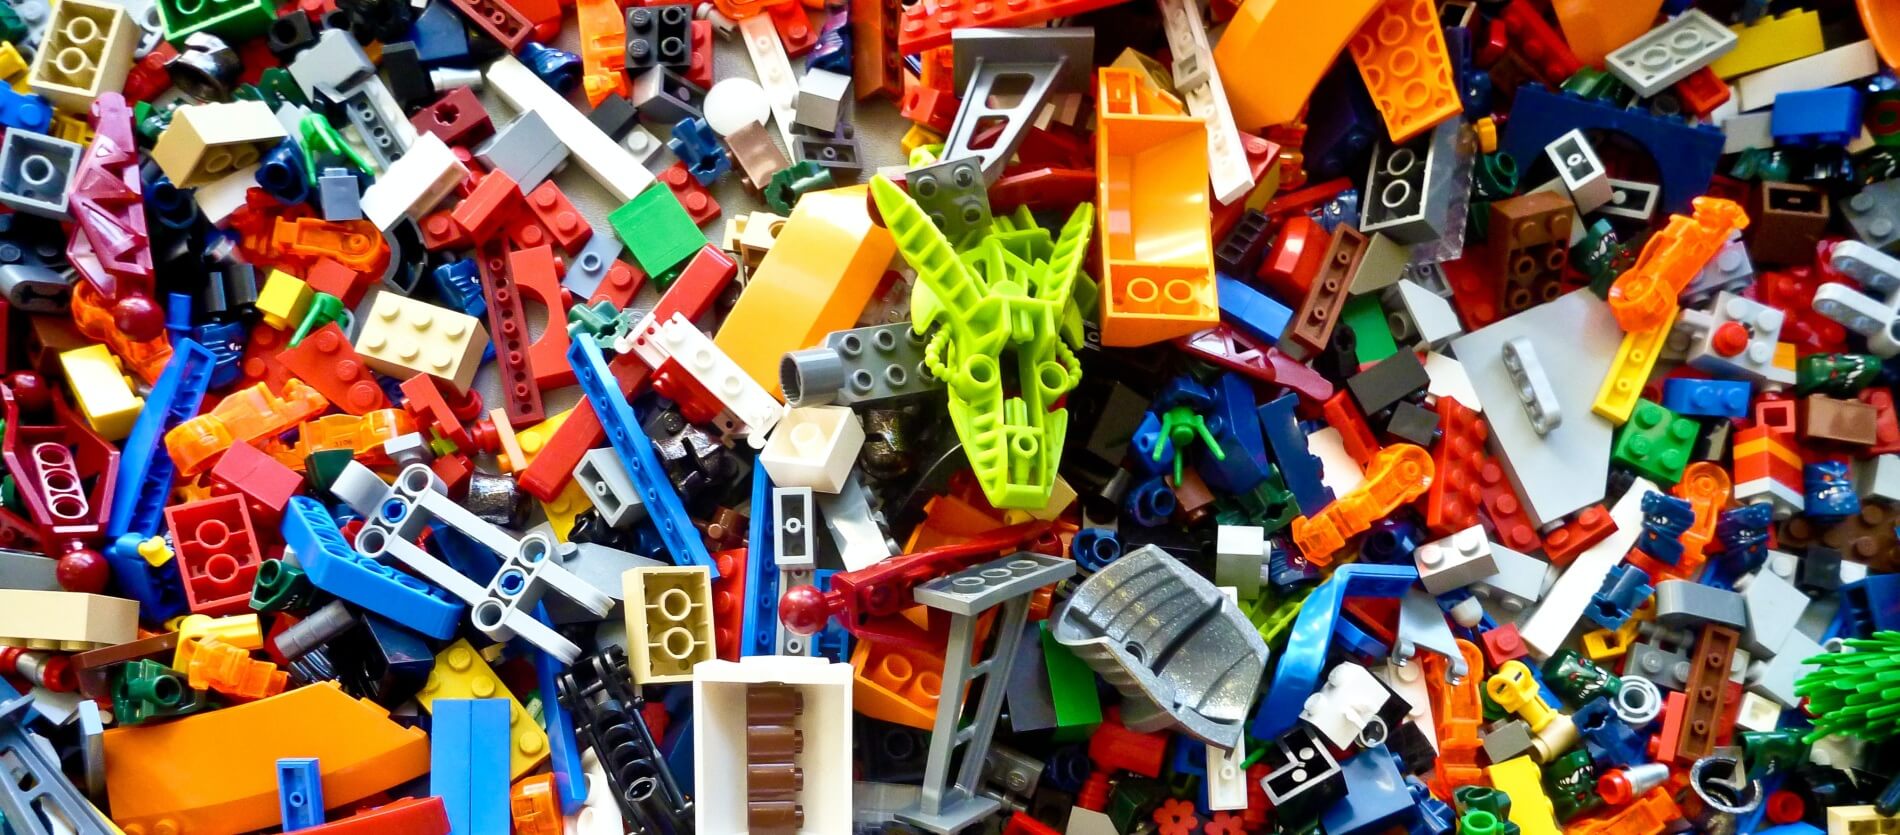 A pile of various loose lego pieces